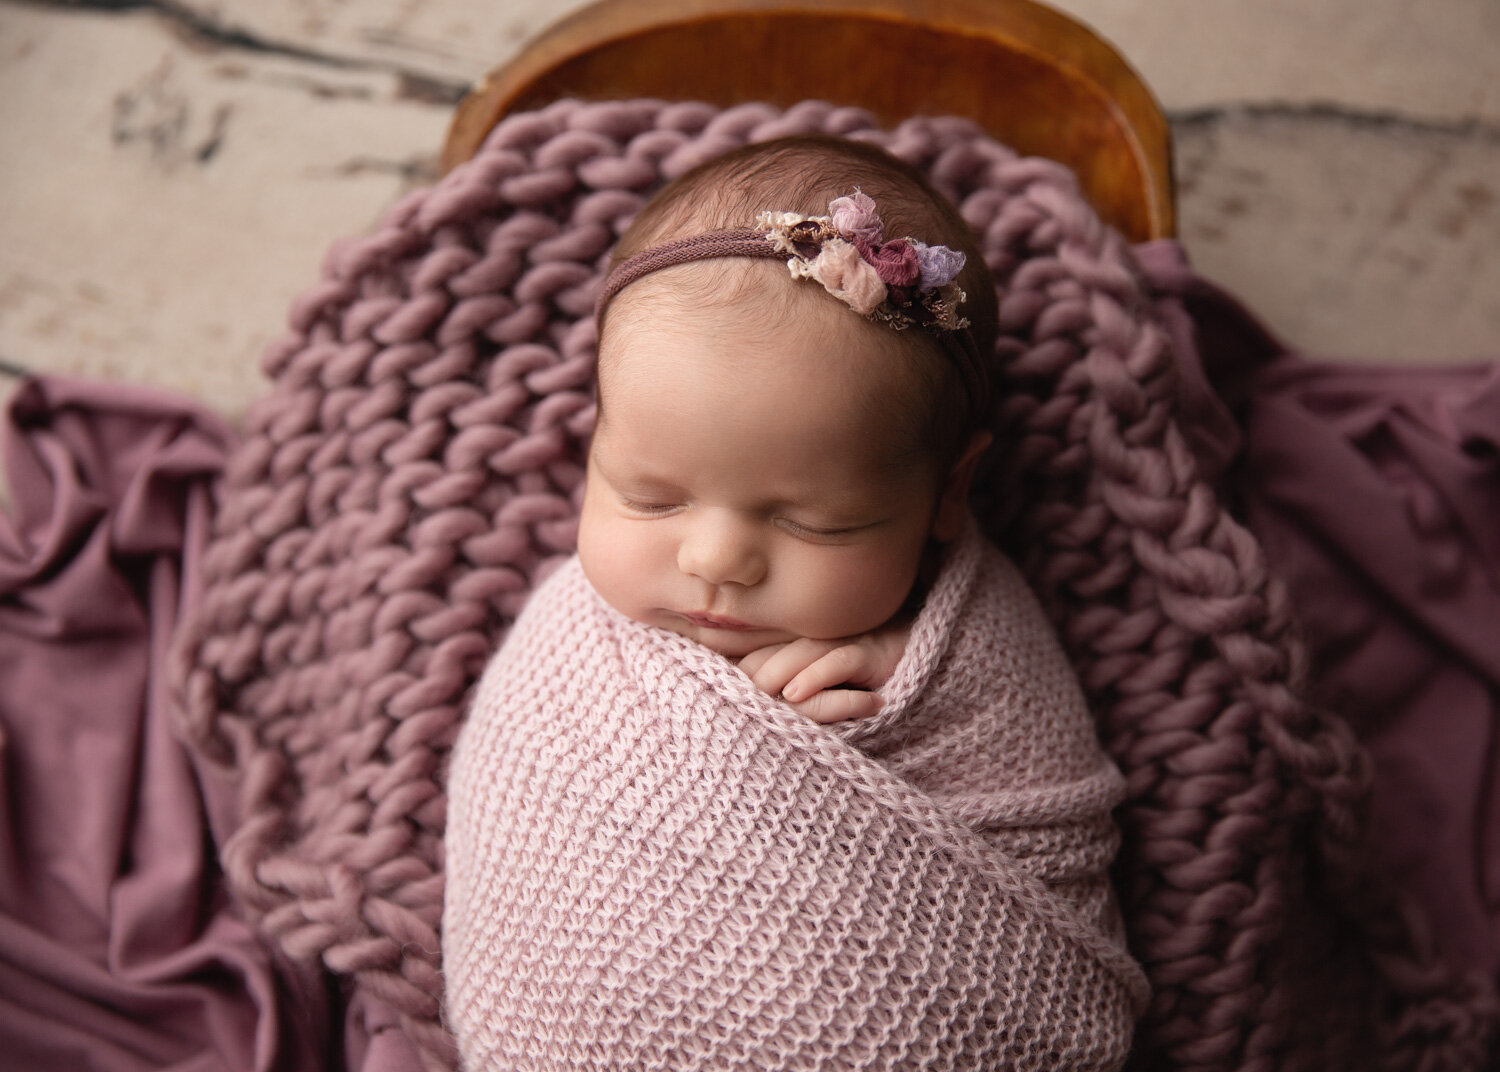  Soft mulberry toned wrap and wool stuffer used for prop set up for newborn baby girl in Winnipeg for photoshoot 